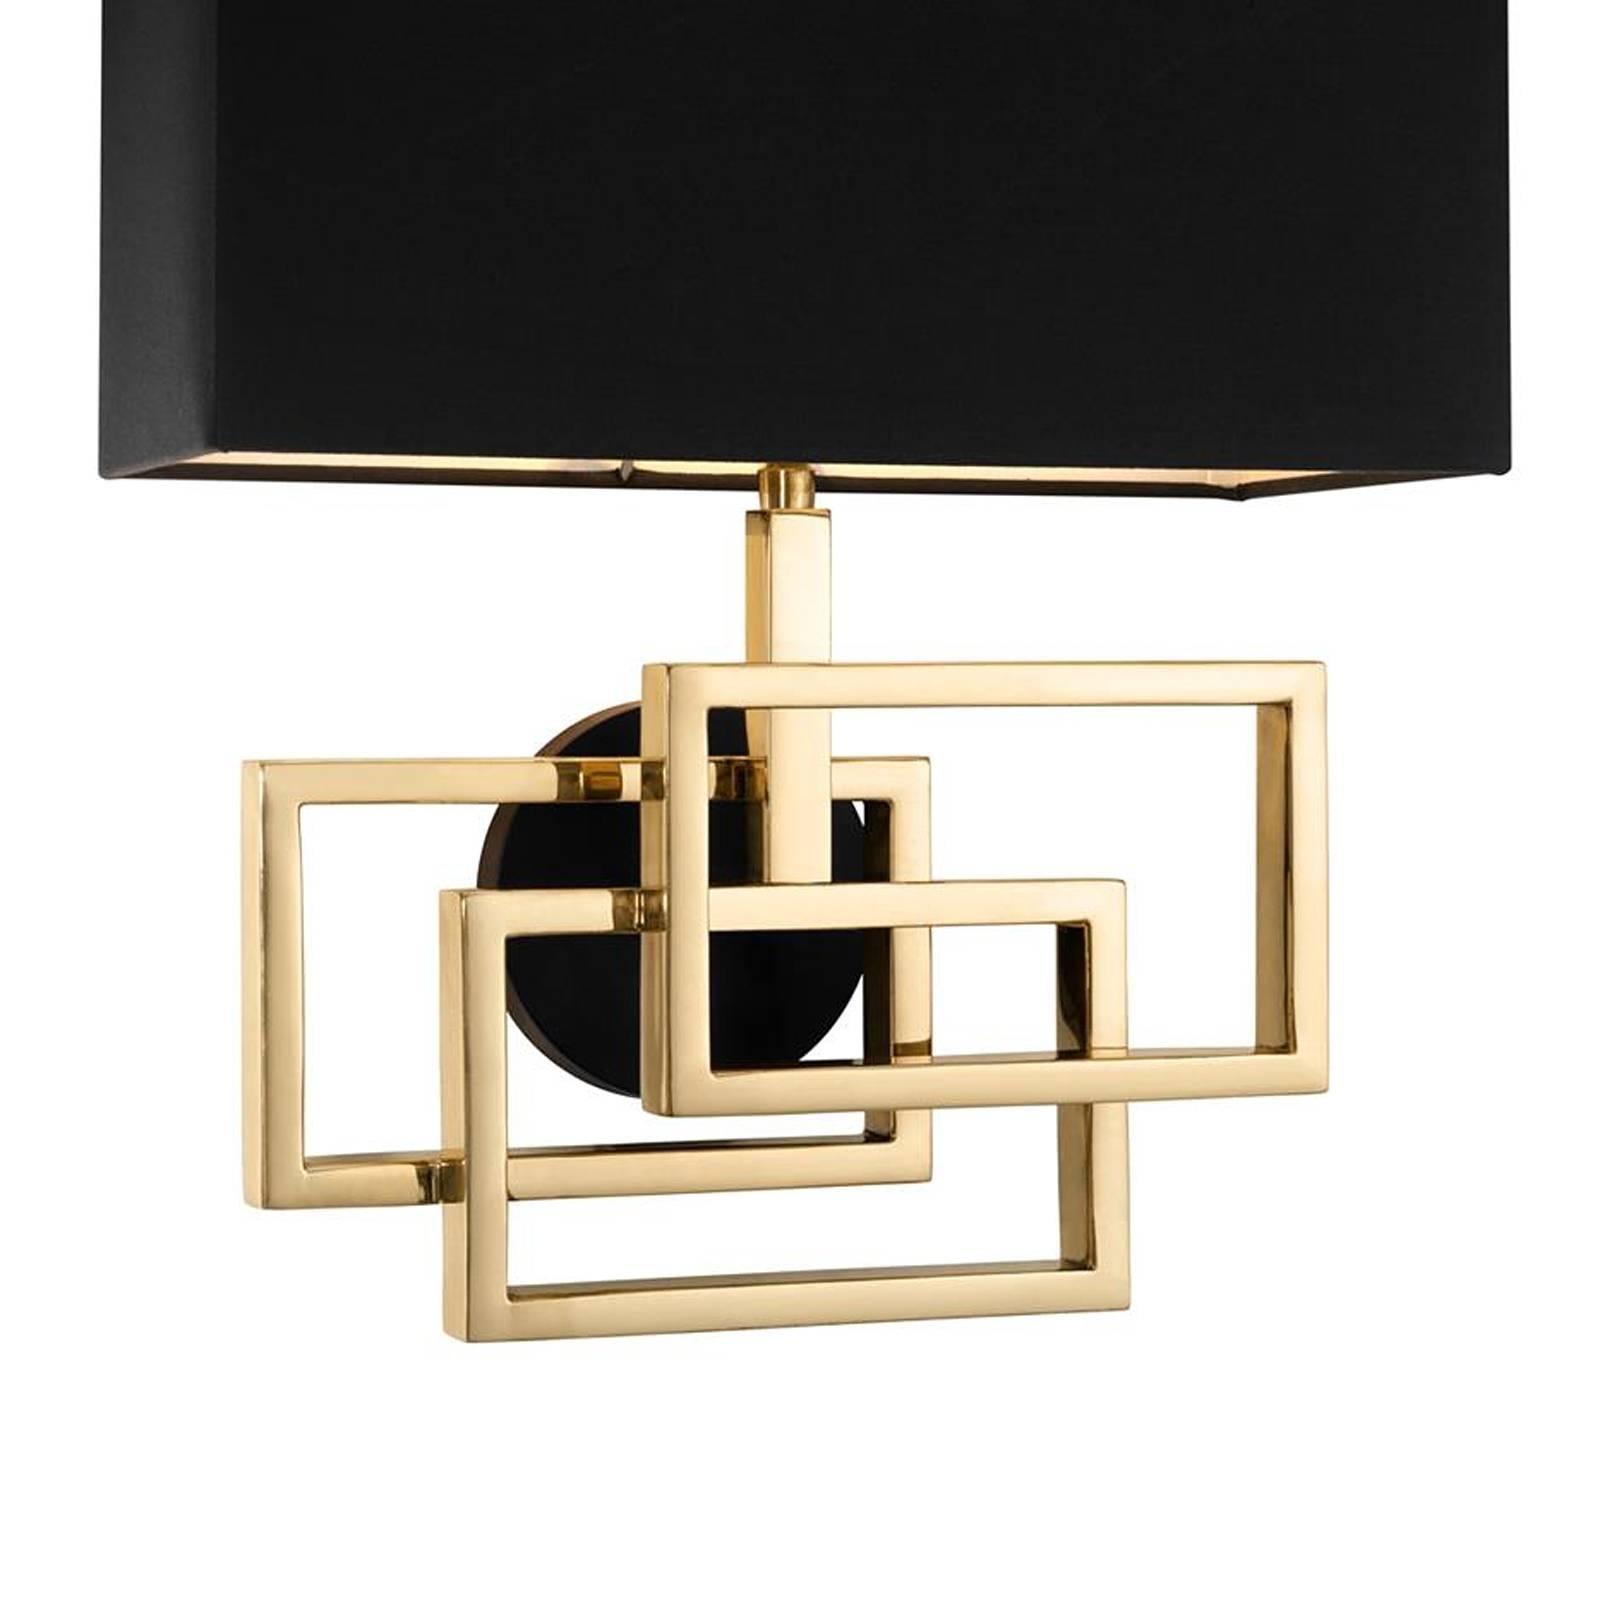 Wall lamp frames with structure in polished brass.
1 bulb, lamp holder type E14, max 40 watt. Including
black shade. Bulb not included.
Also available with structure in nickel finish. Also
available in table lamp frames.
